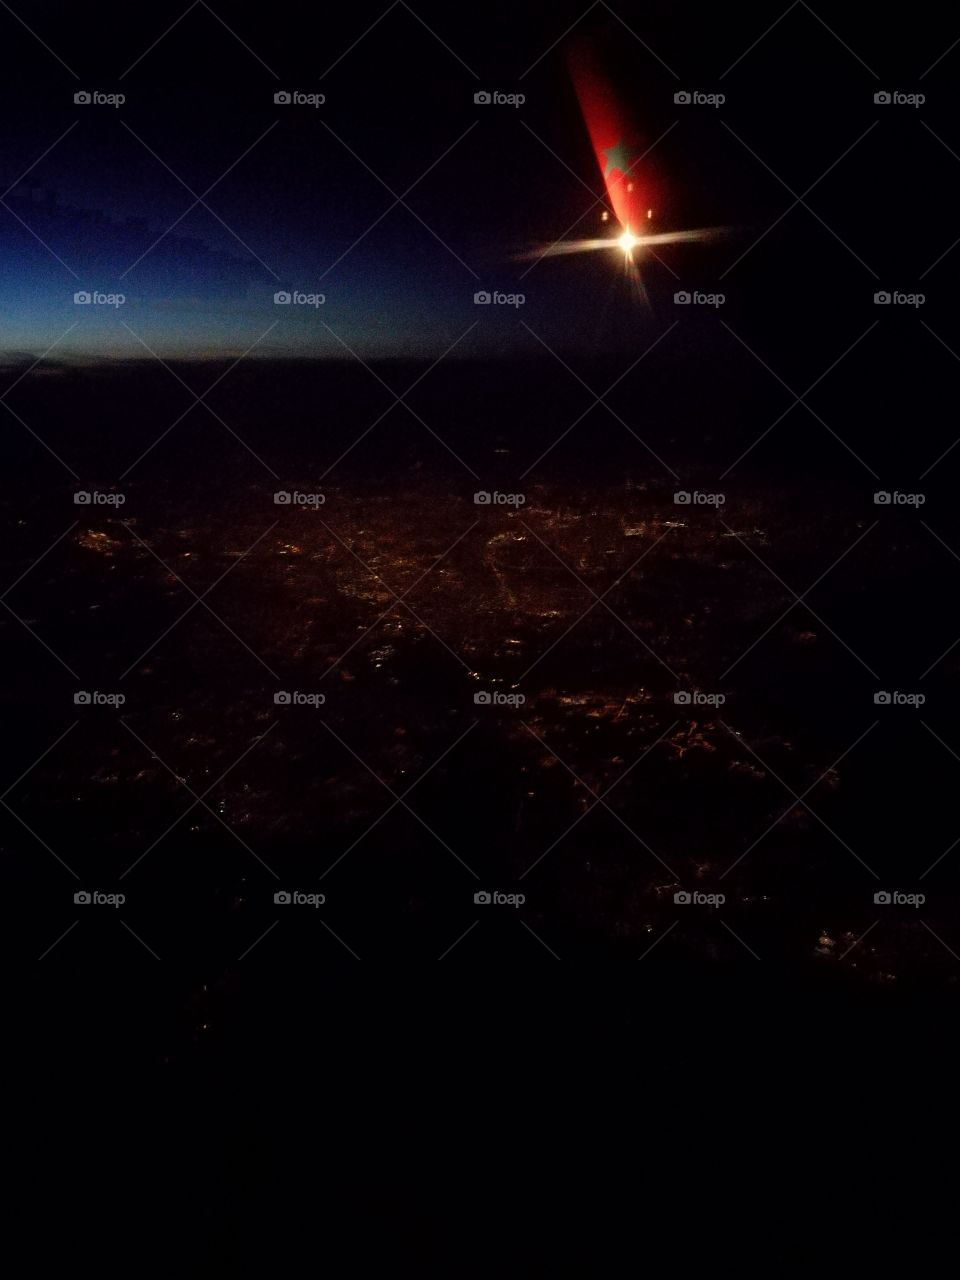 Paris at night flown over by plane